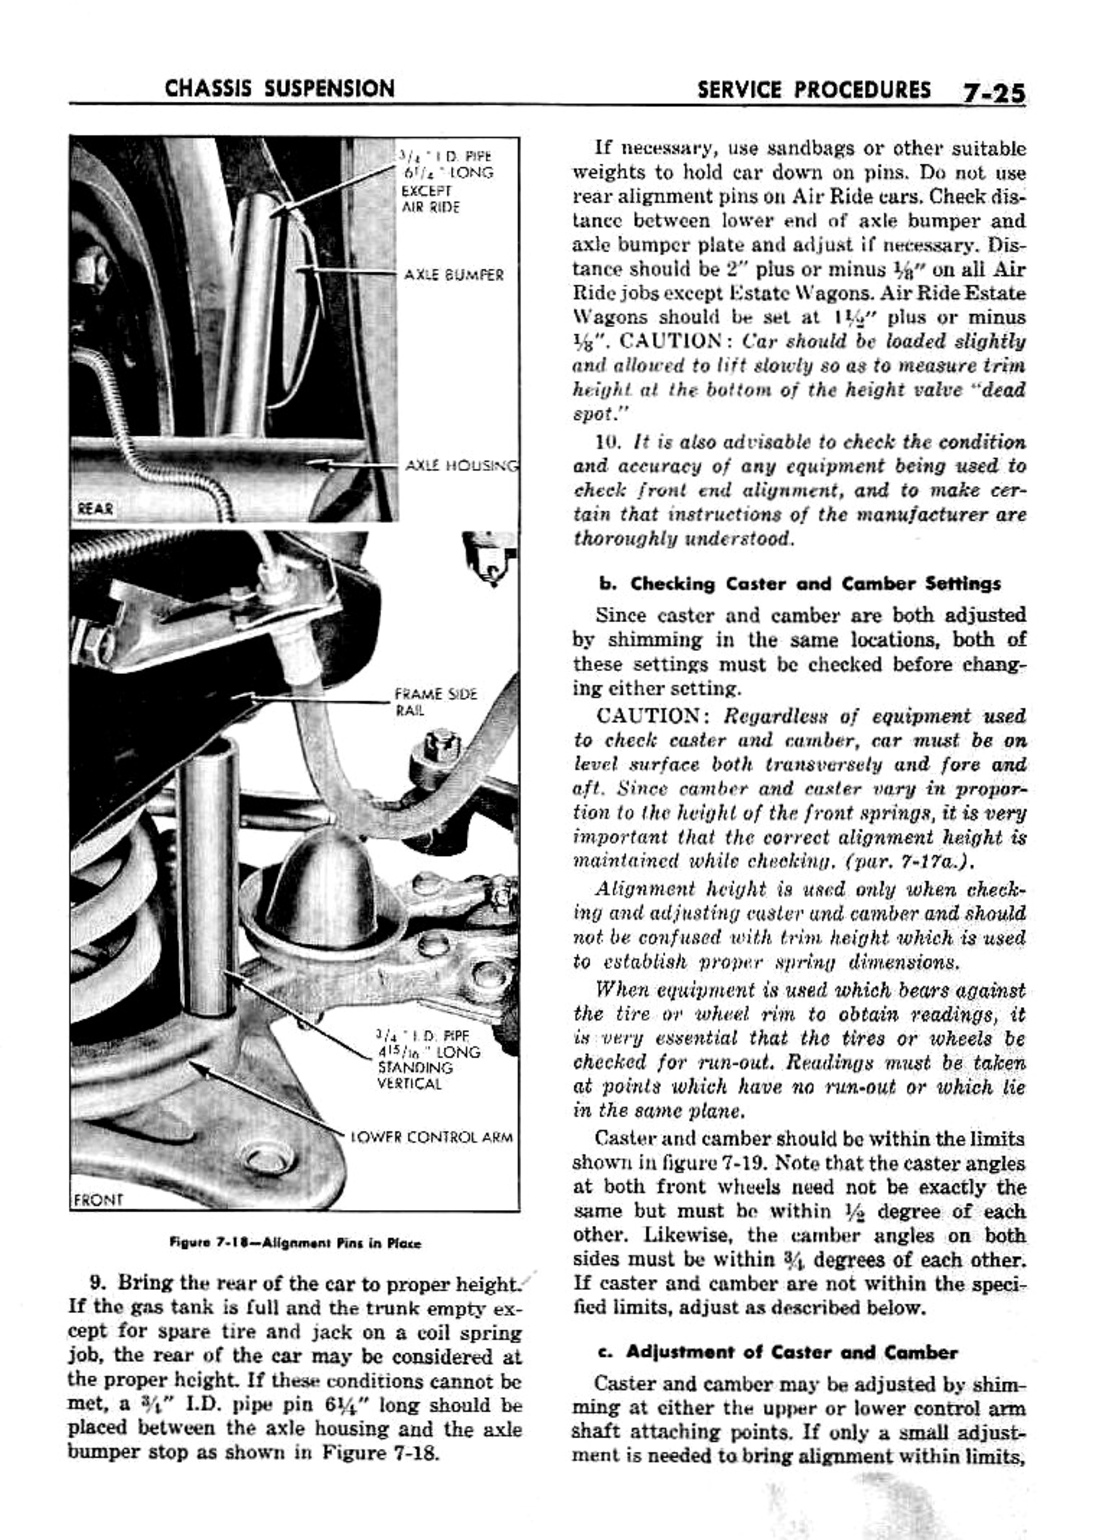 n_08 1959 Buick Shop Manual - Chassis Suspension-025-025.jpg